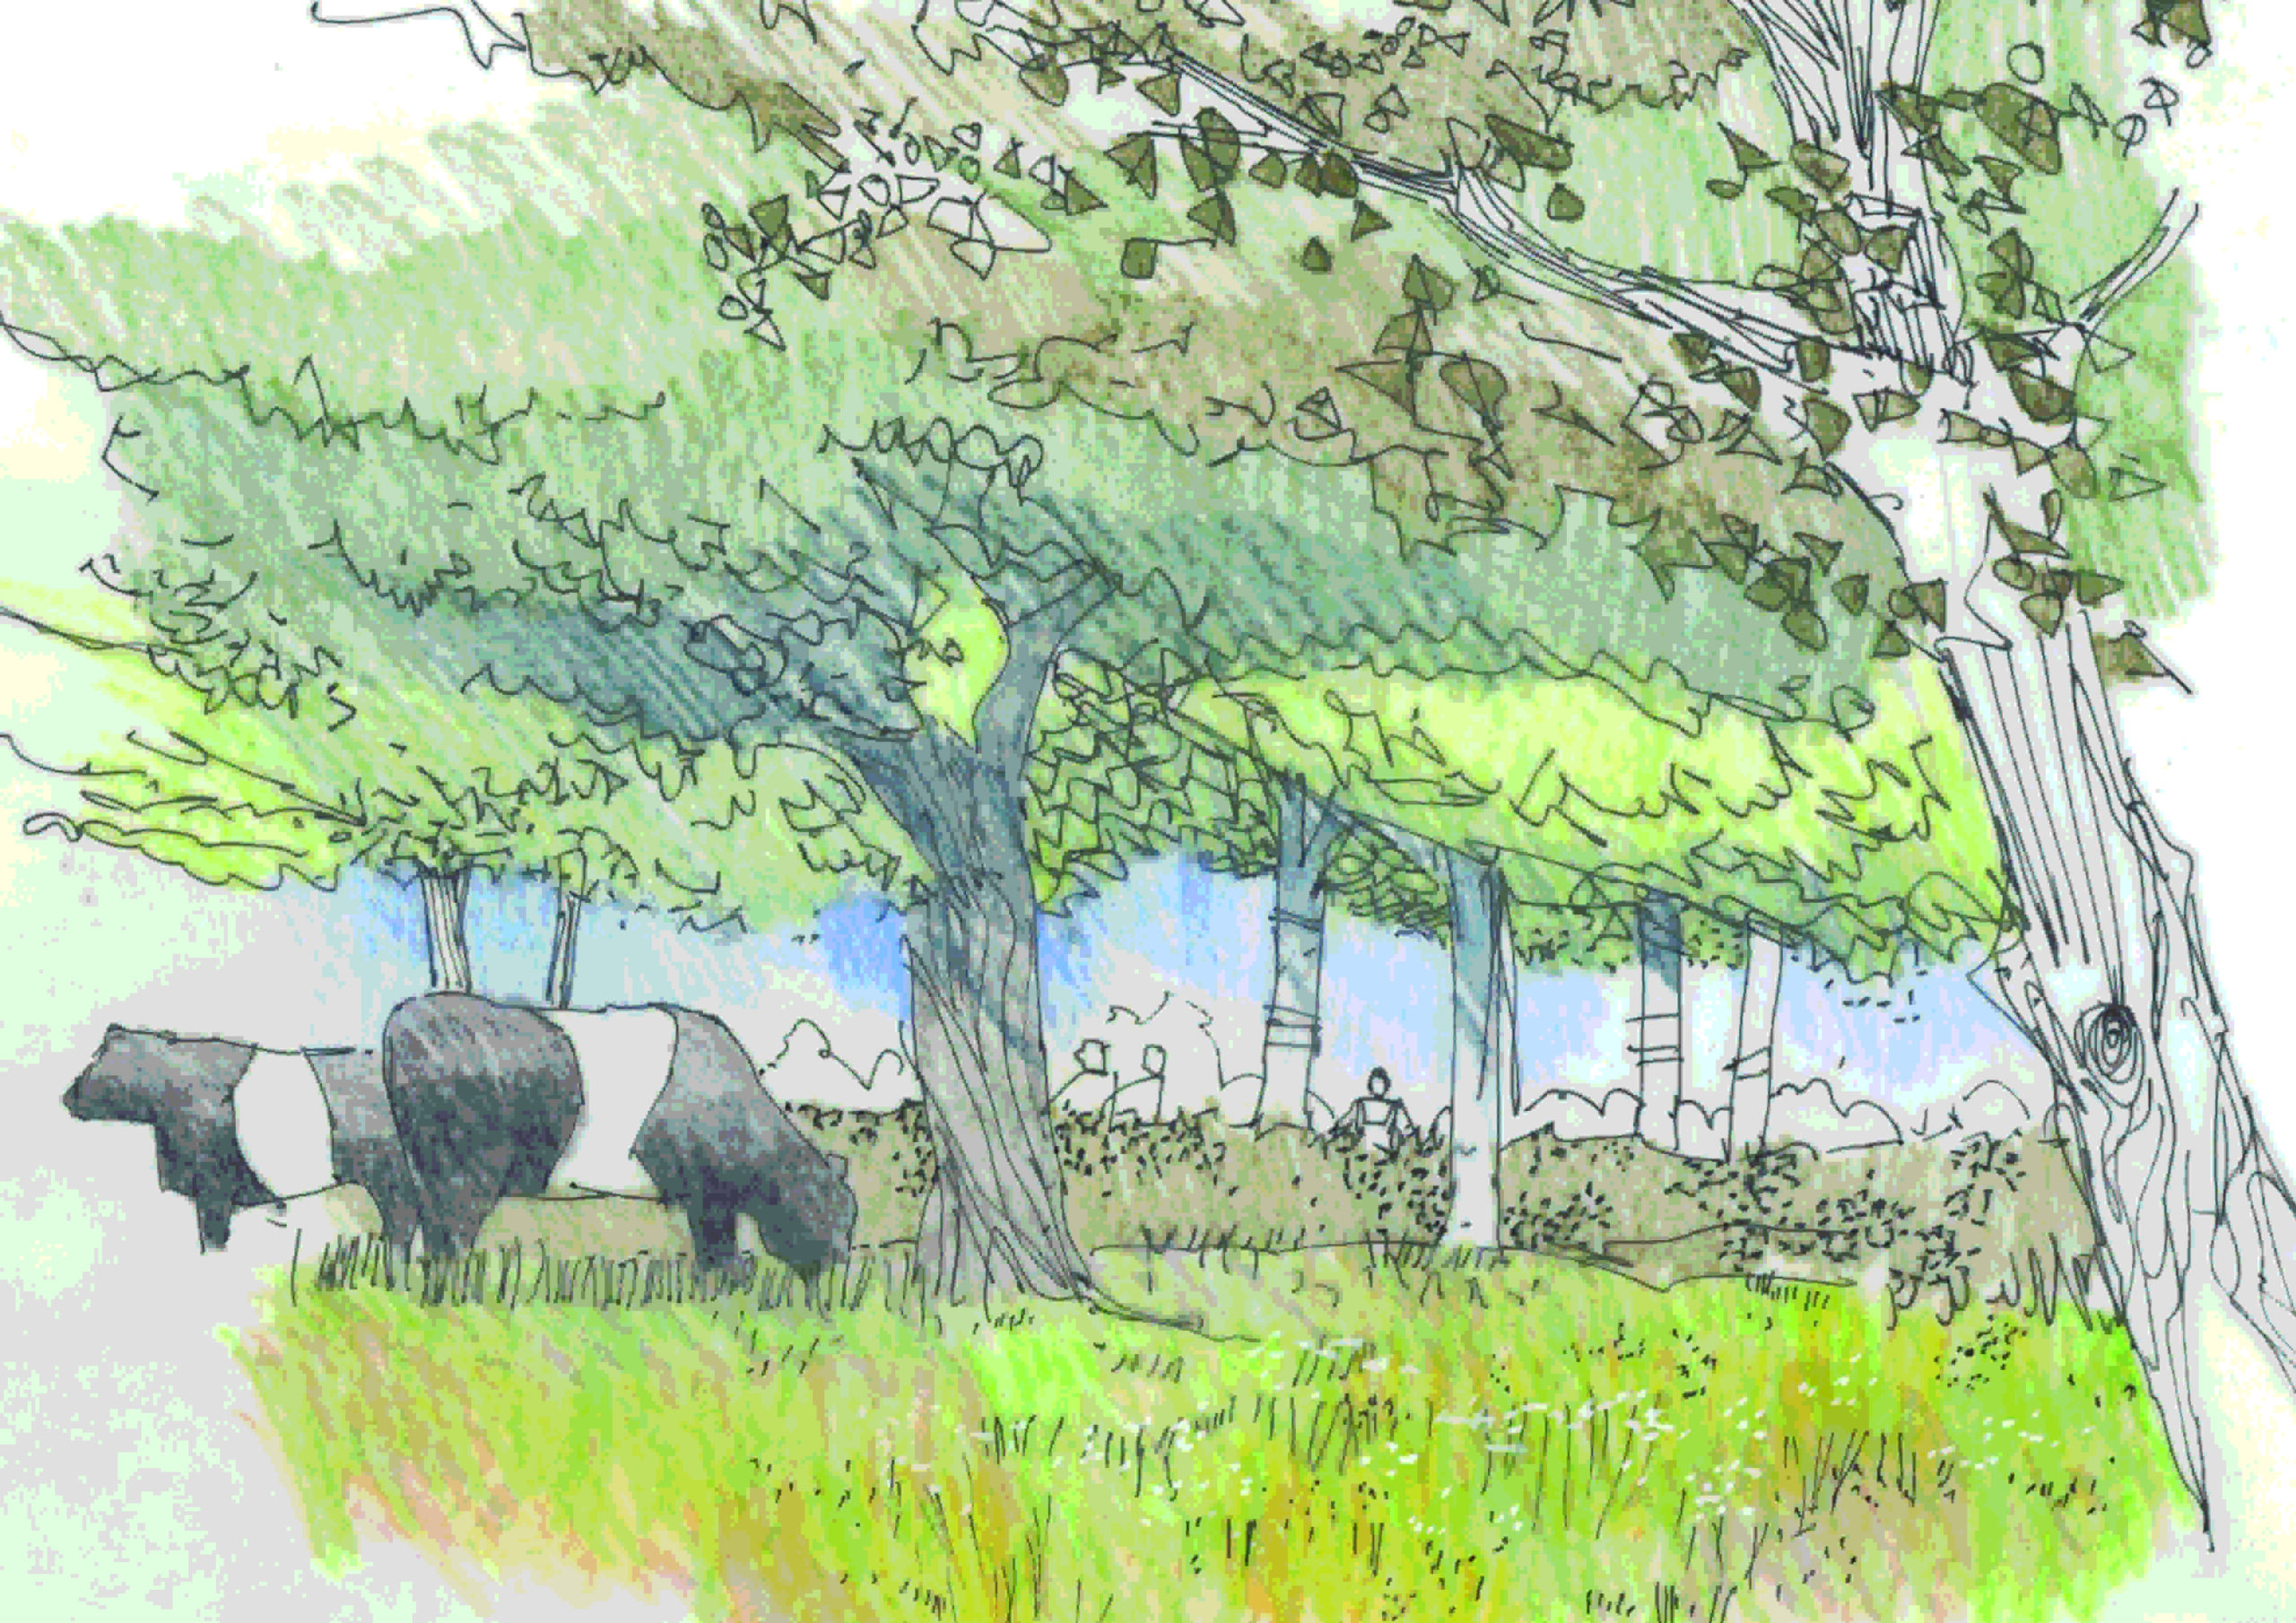 An illustration of cattle grazing in an orchard by Richard Carman